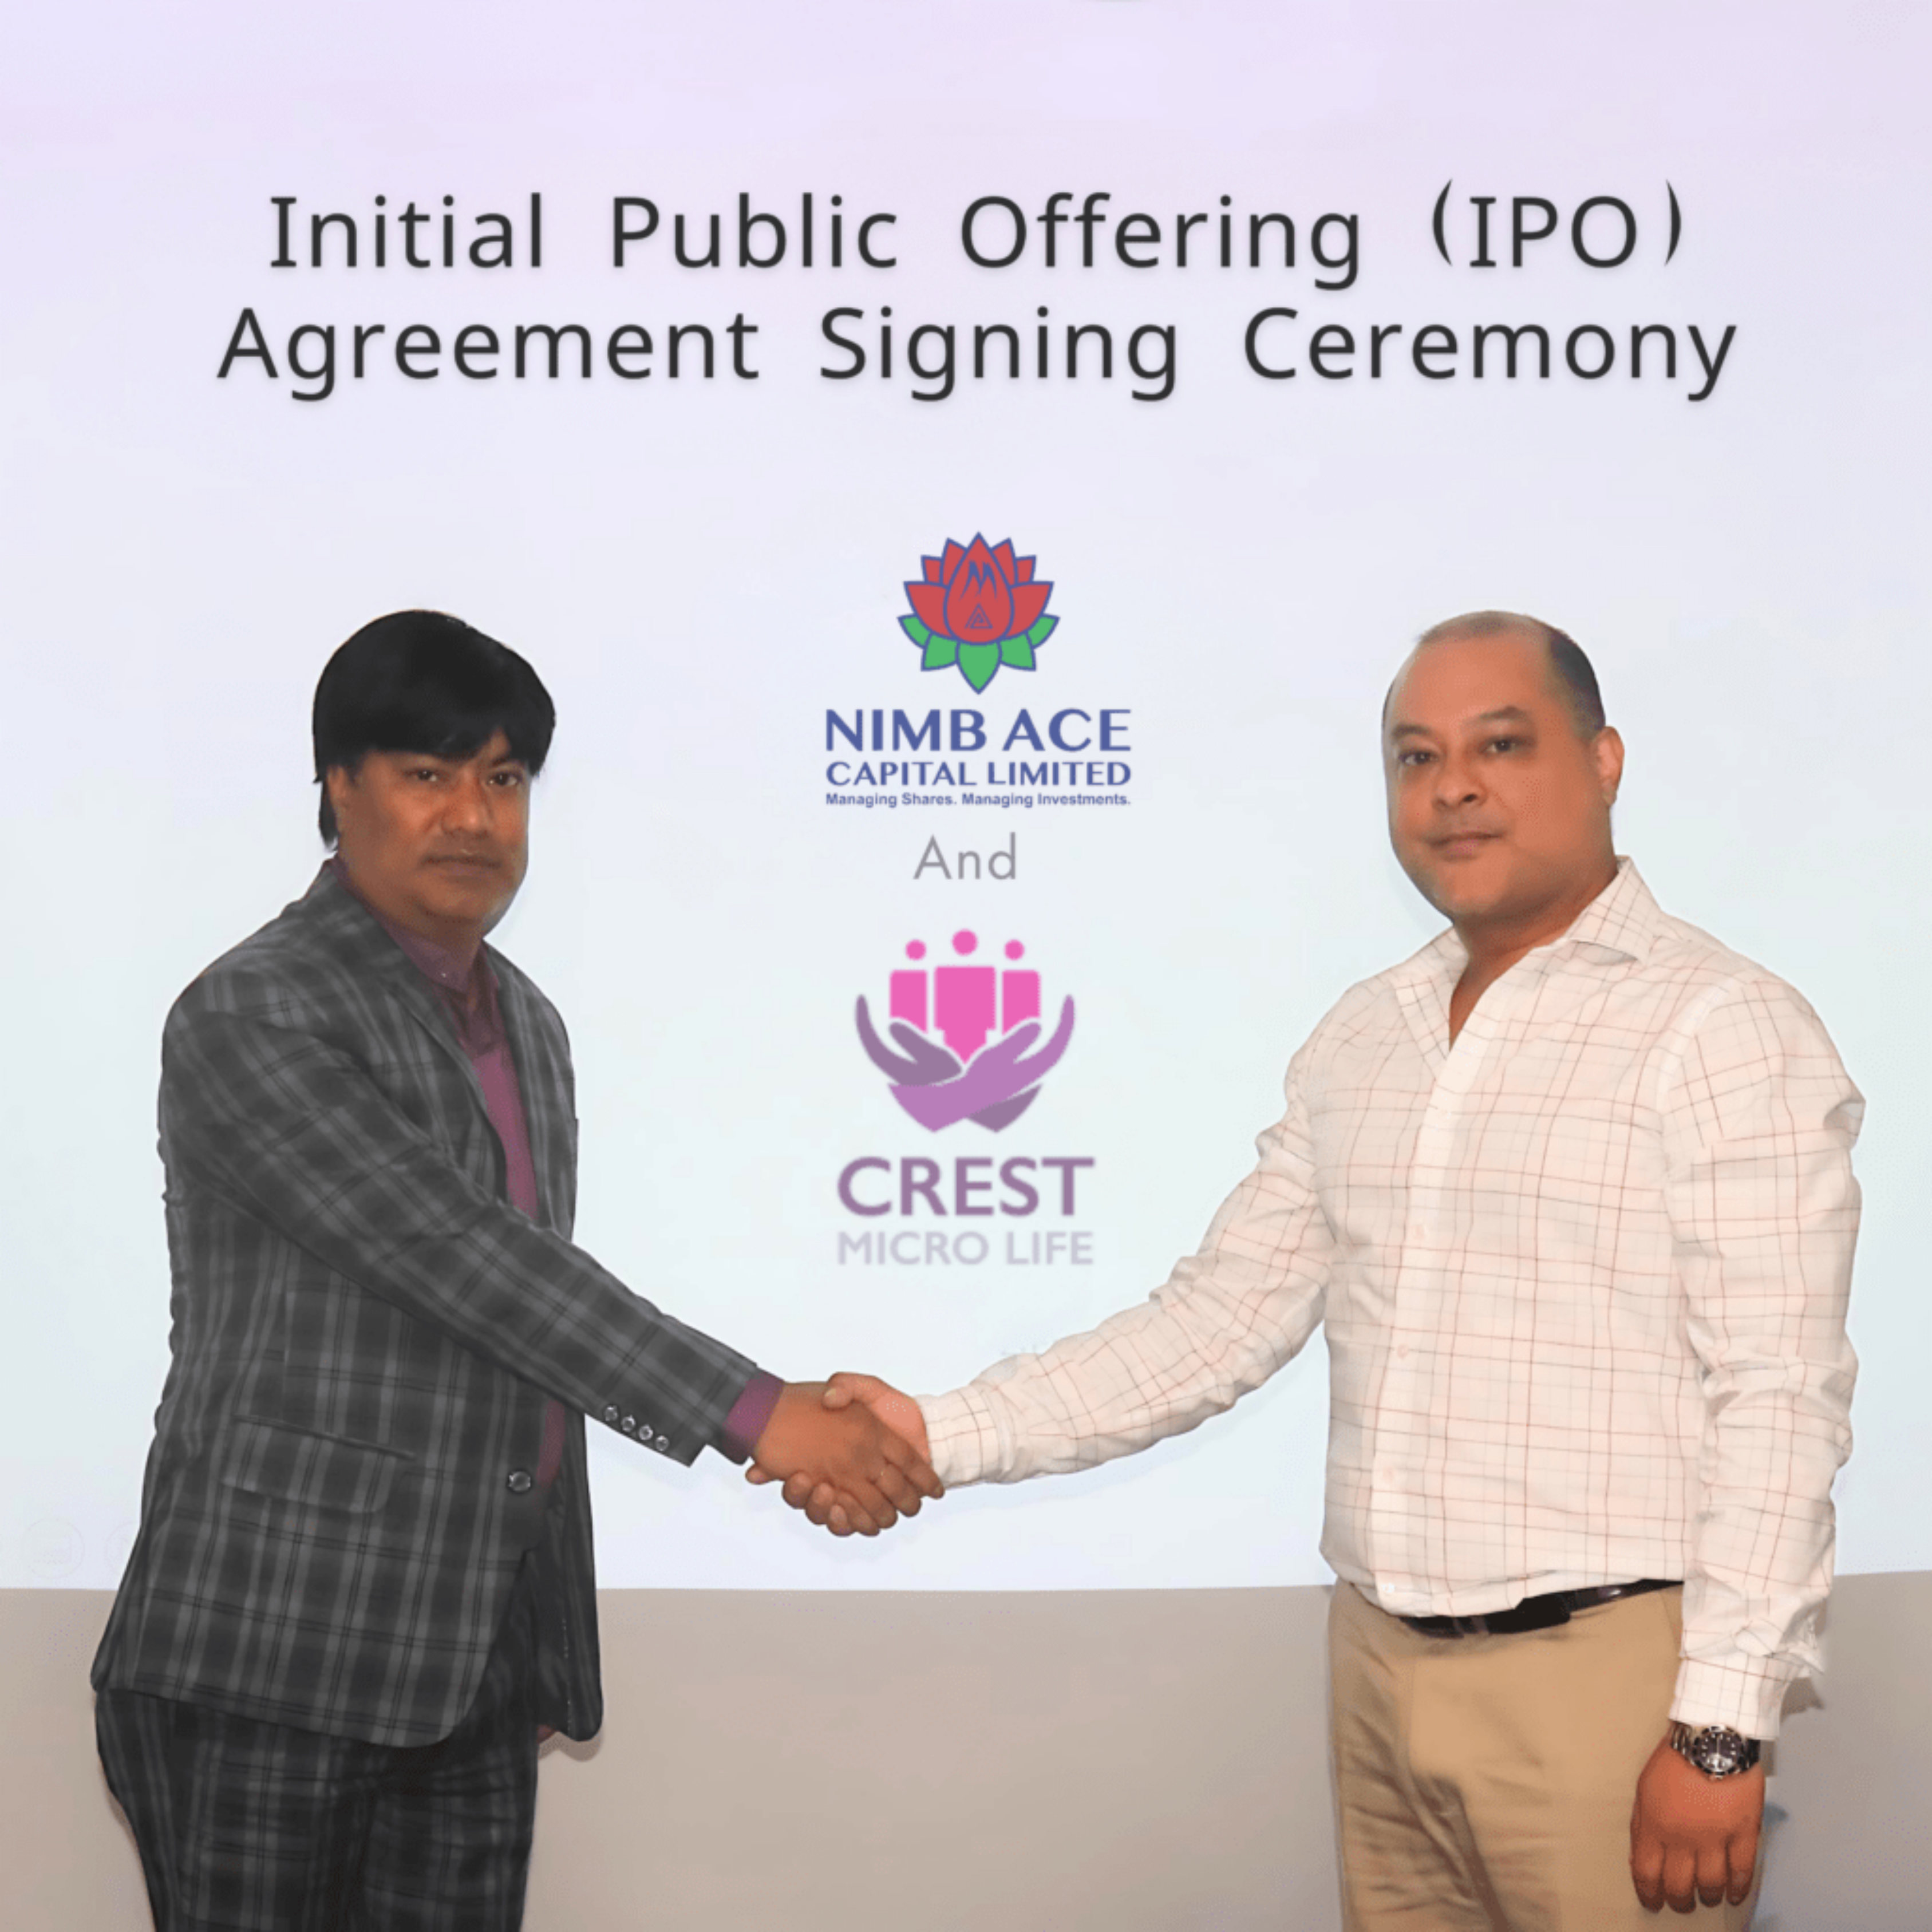 Initial Public Offering (IPO) Agreement Signing Ceremony